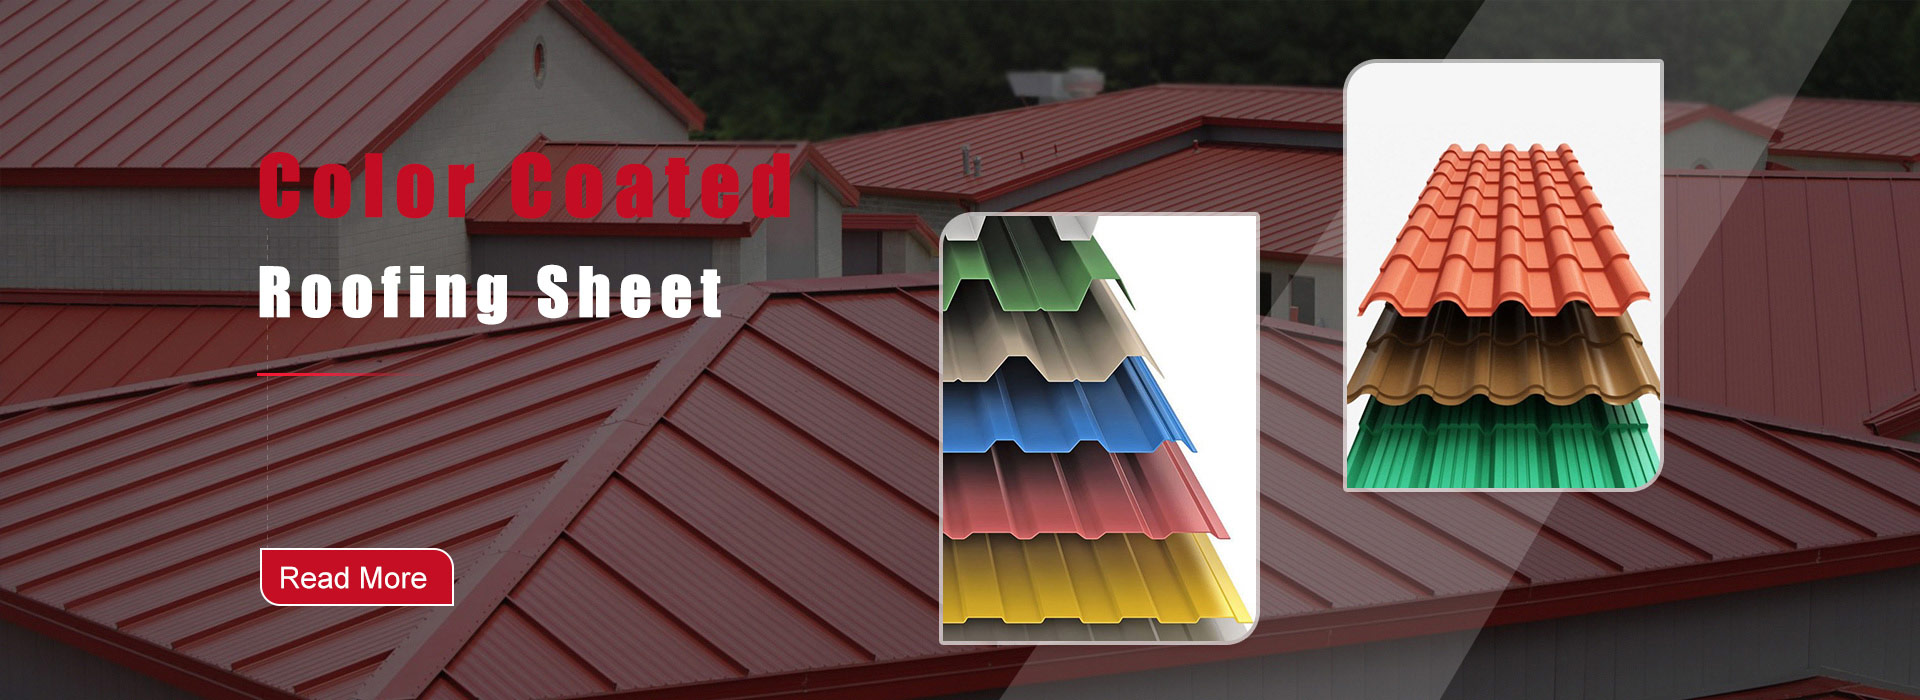 Roofing Sheet Supplier